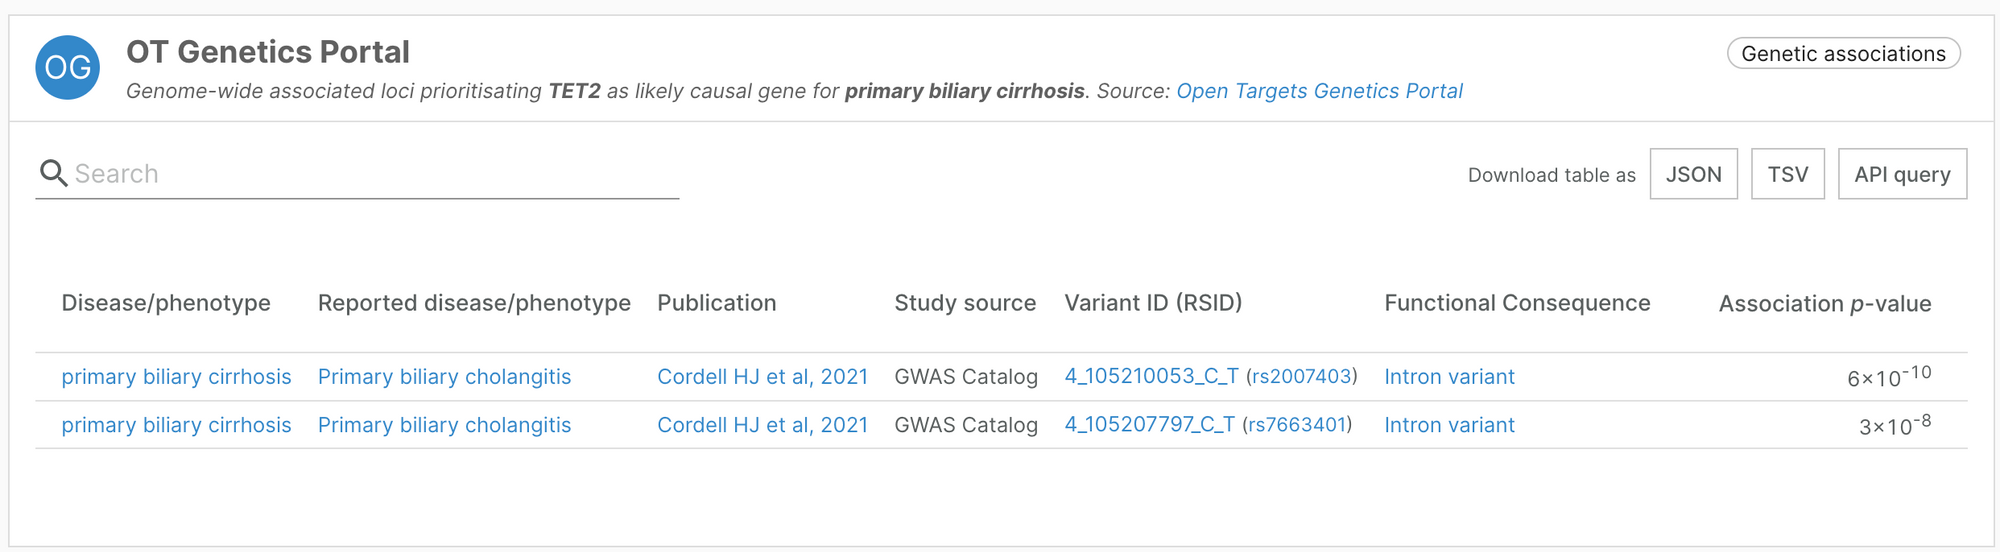 OT Genetics Portal widget in the Open Targets Platform, showing genome-wide associated loci prioritising TET2 as likely causal gene for primary biliary cirrhosis. There are two entries, from Cordell HJ et al, 2021. 